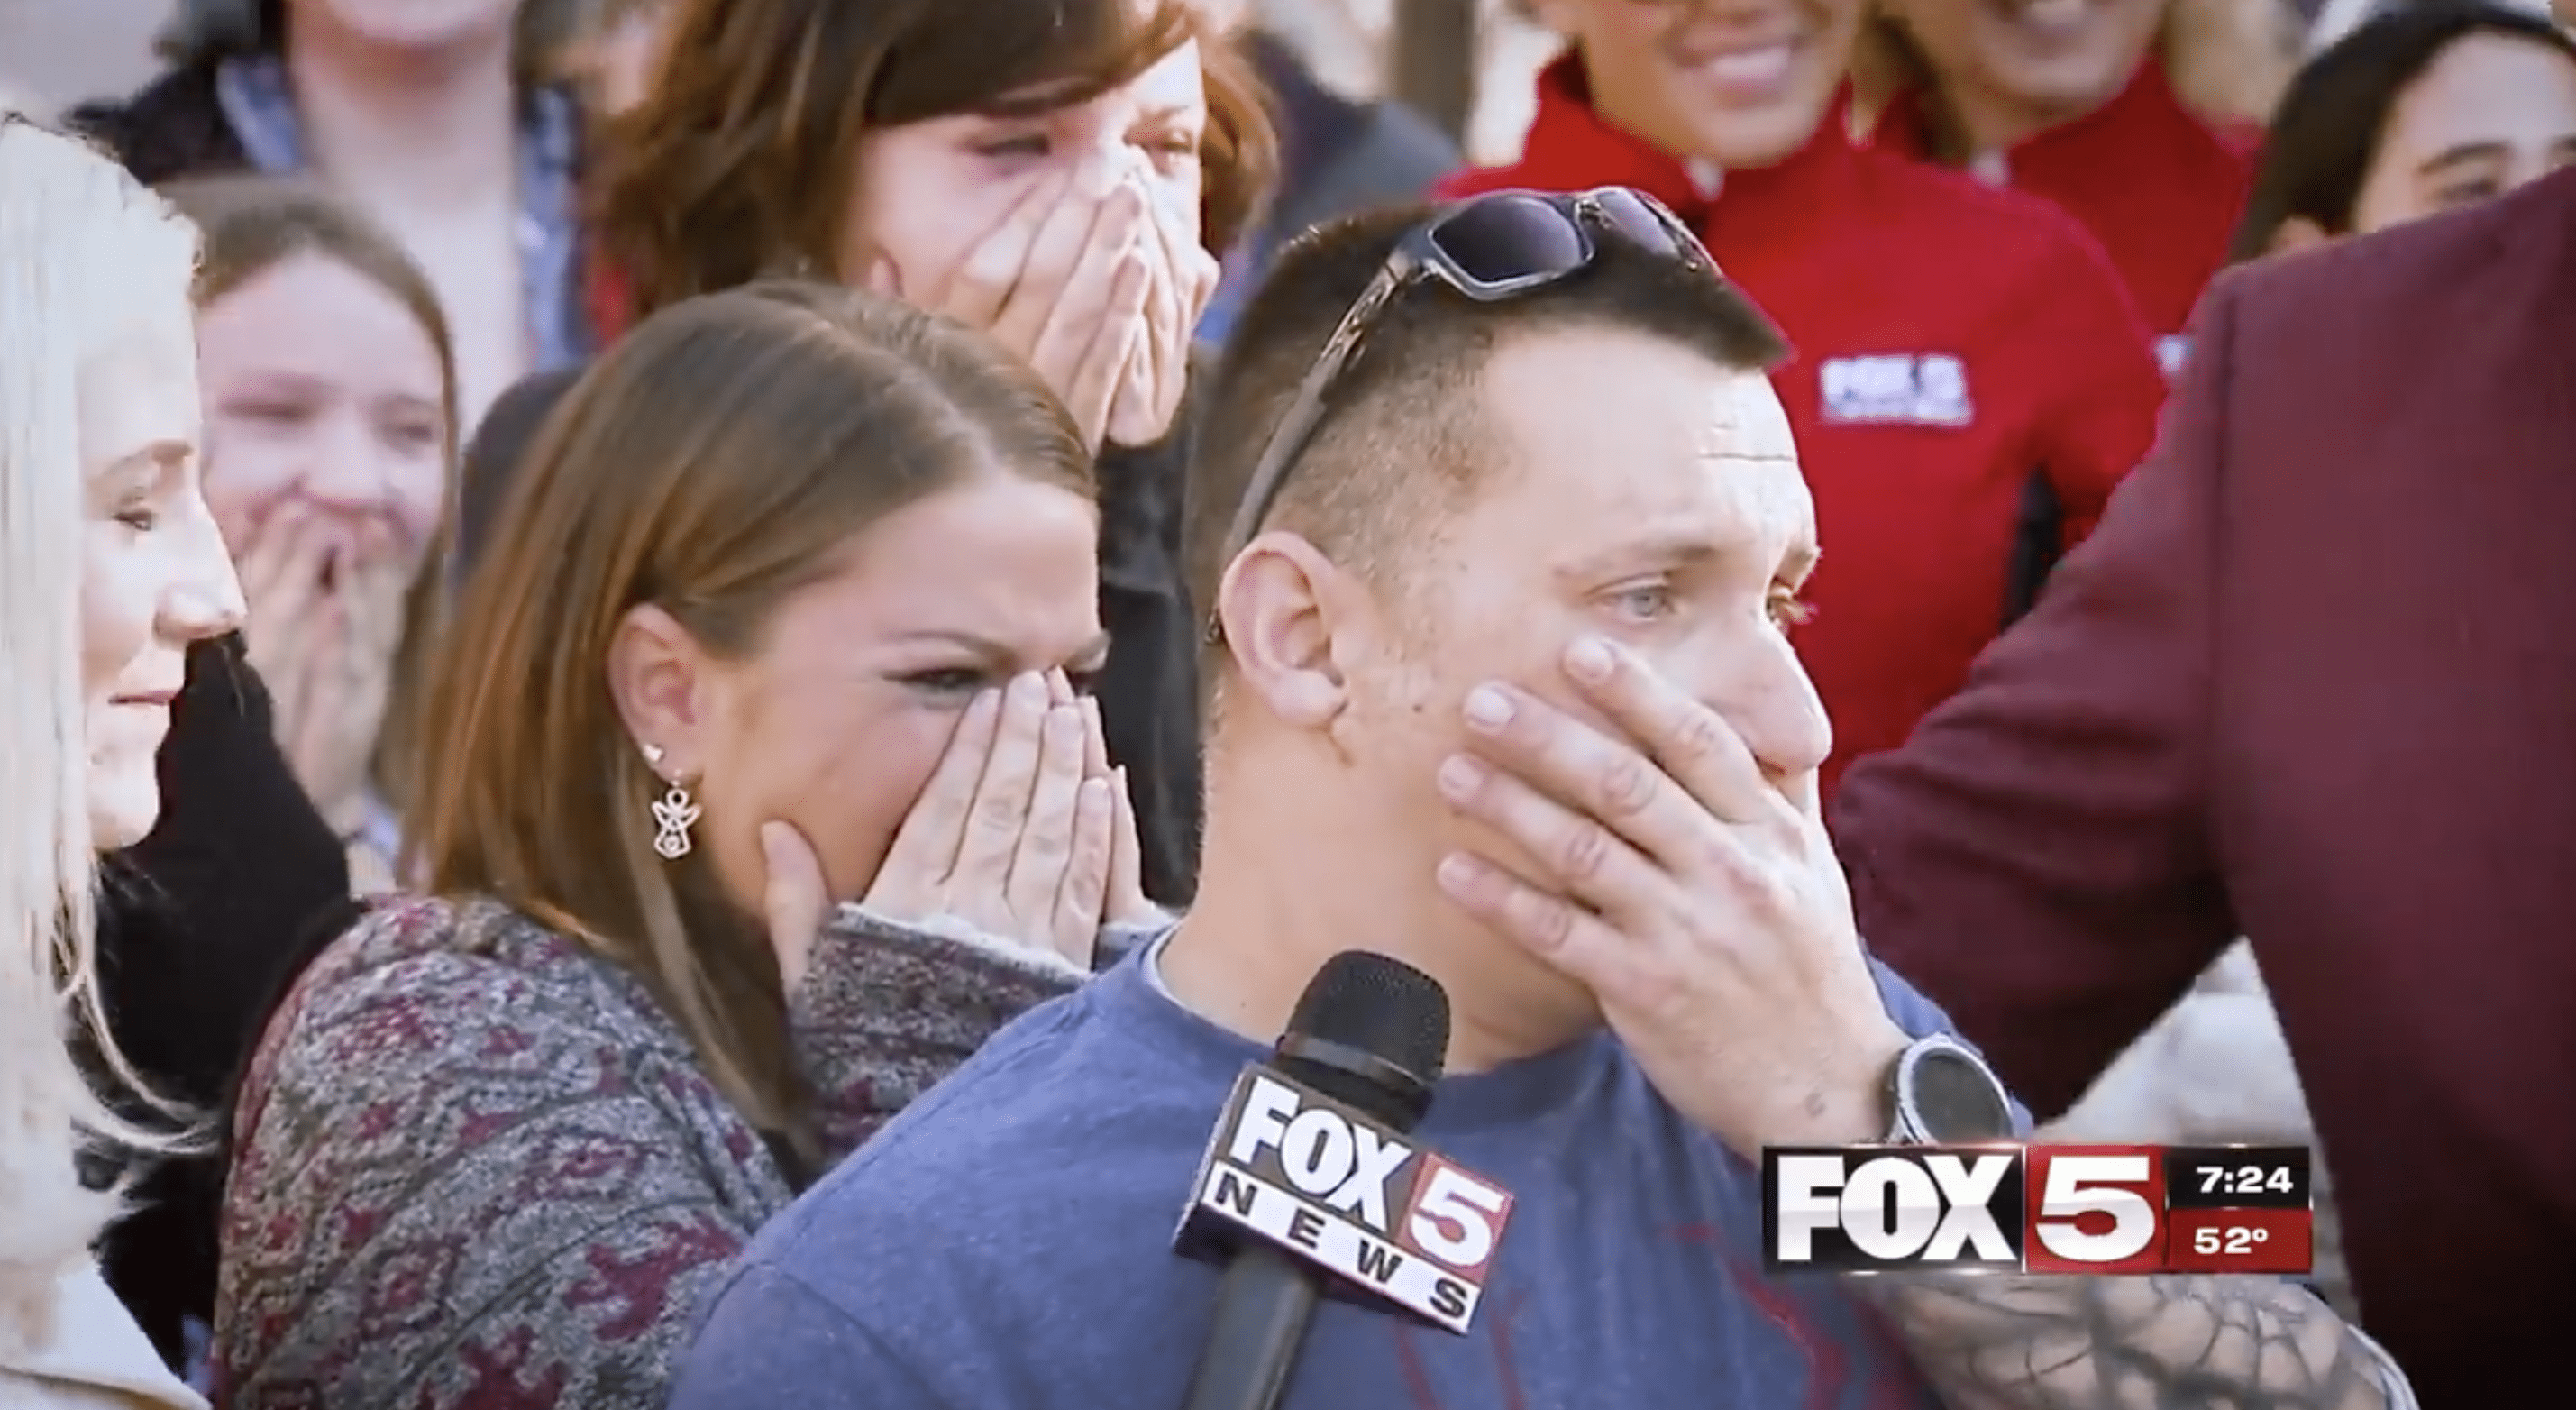 Kevin and Tisha became emotional after discovering what the Surprise Squad had done for them. | Photo: facebook.com/BakersfieldFamilyLaw